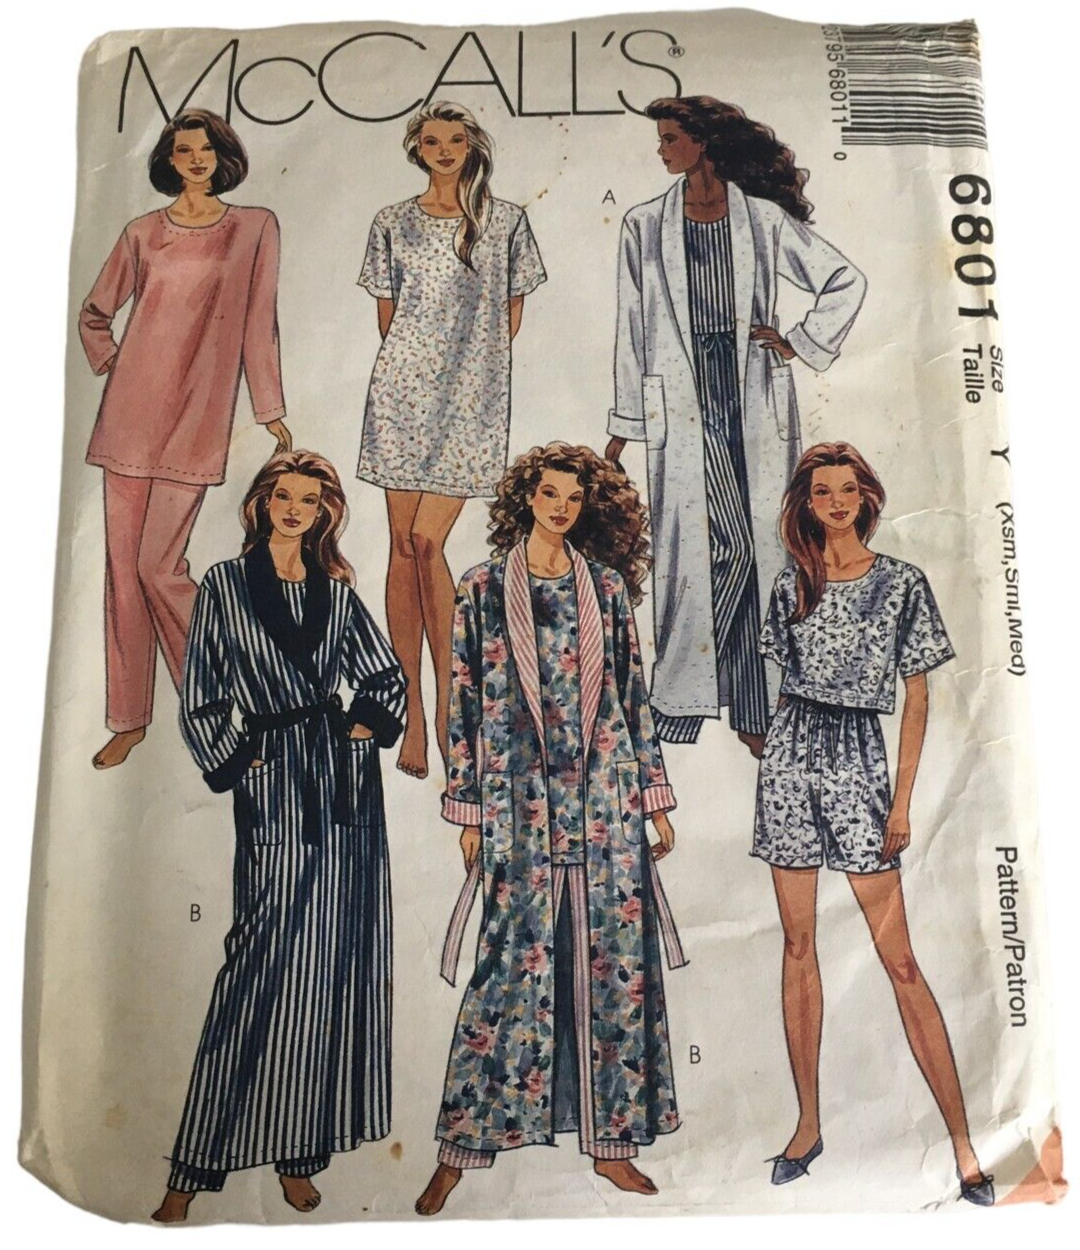 Primary image for McCalls Sewing Pattern 6801 Robe Pajamas Tunic Top Pants Shorts XS S M Uncut